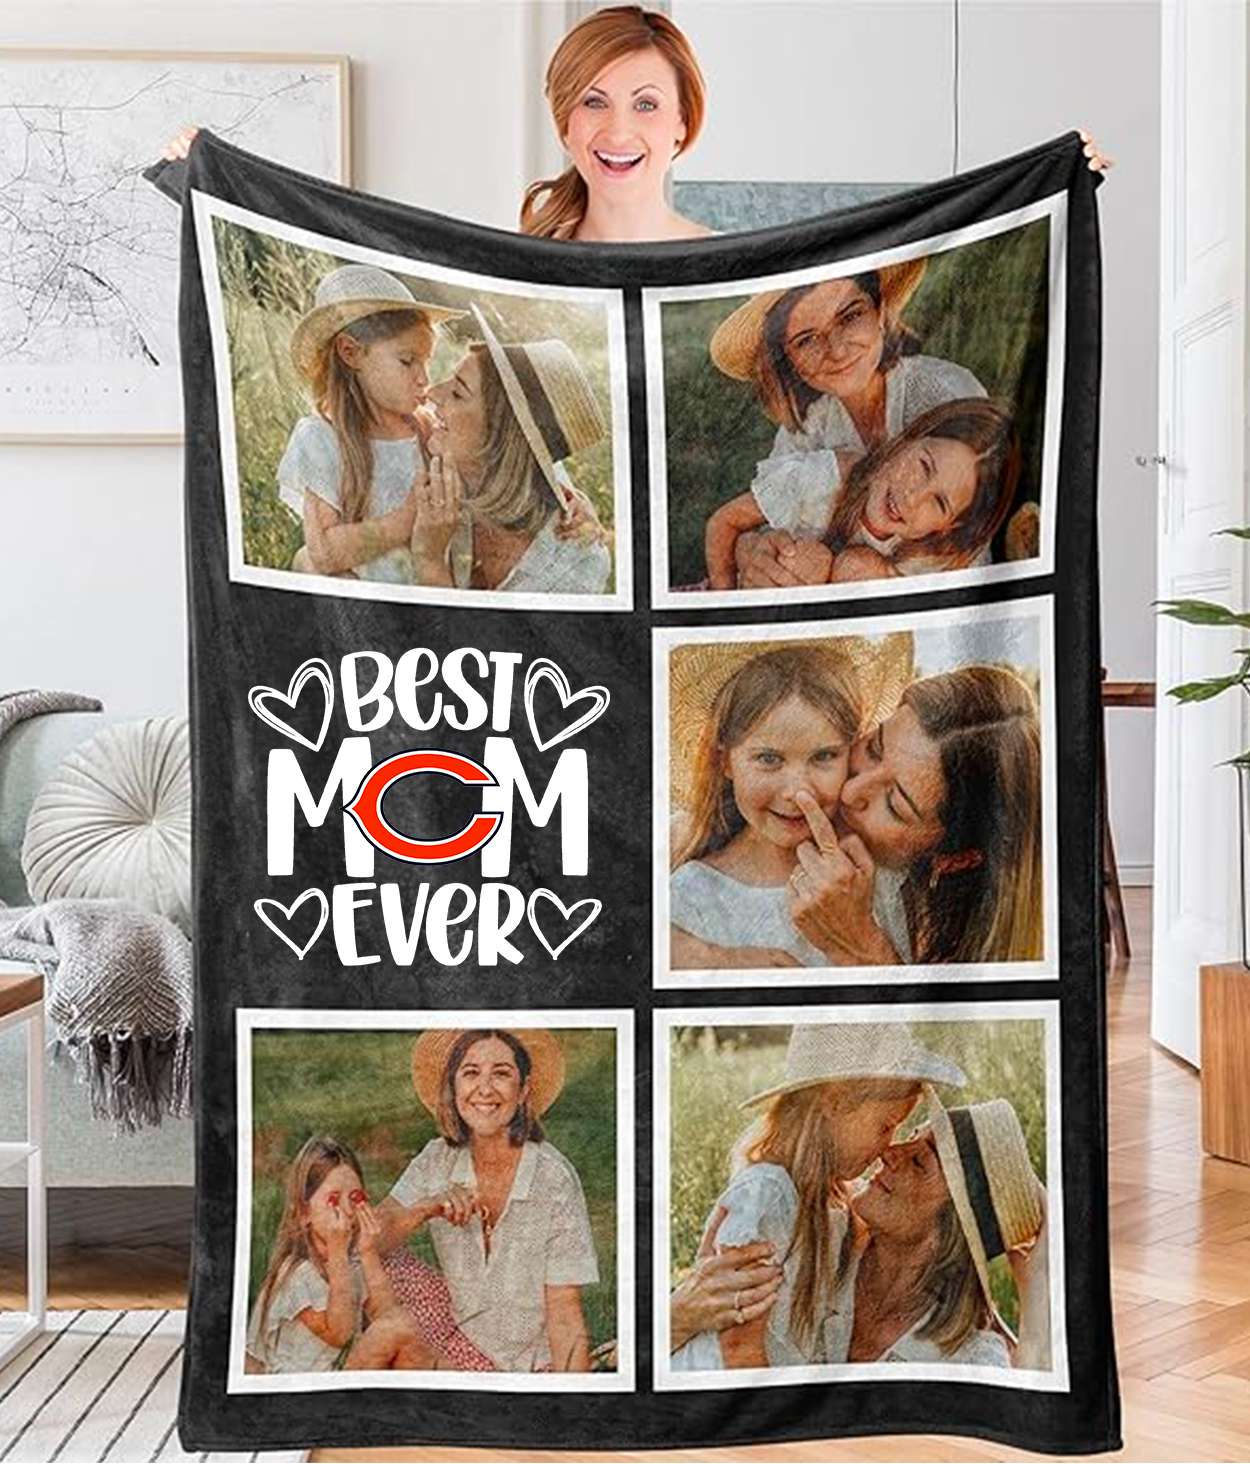 Best Mom Ever - Custom NFL Chicago Bears Blankets with Pictures for Mother's Day Gift